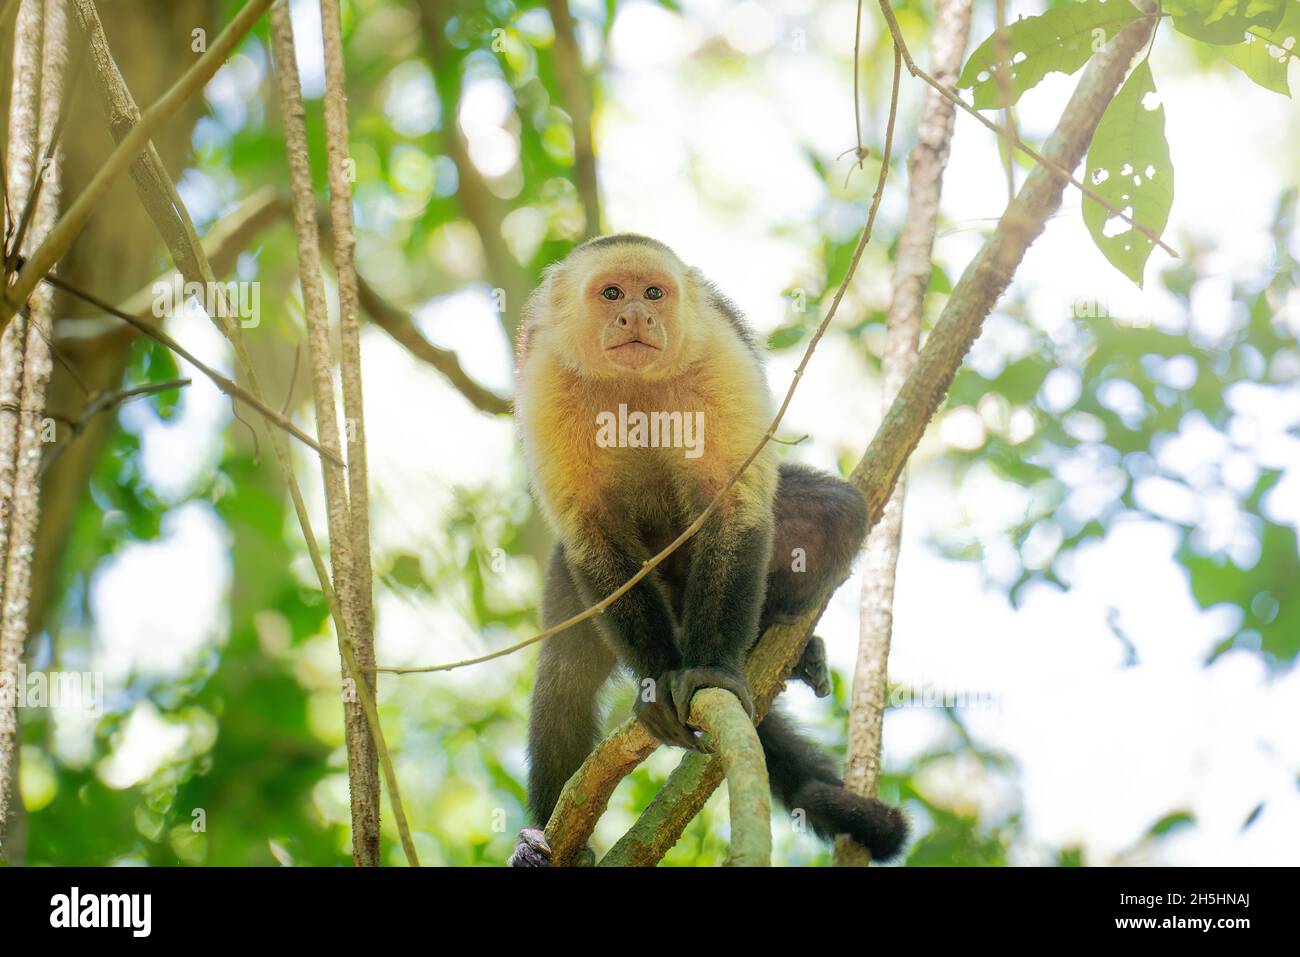 Panamanian white-headed capuchin sitting on the tree branch in the forest of Costa Rica. Stock Photo